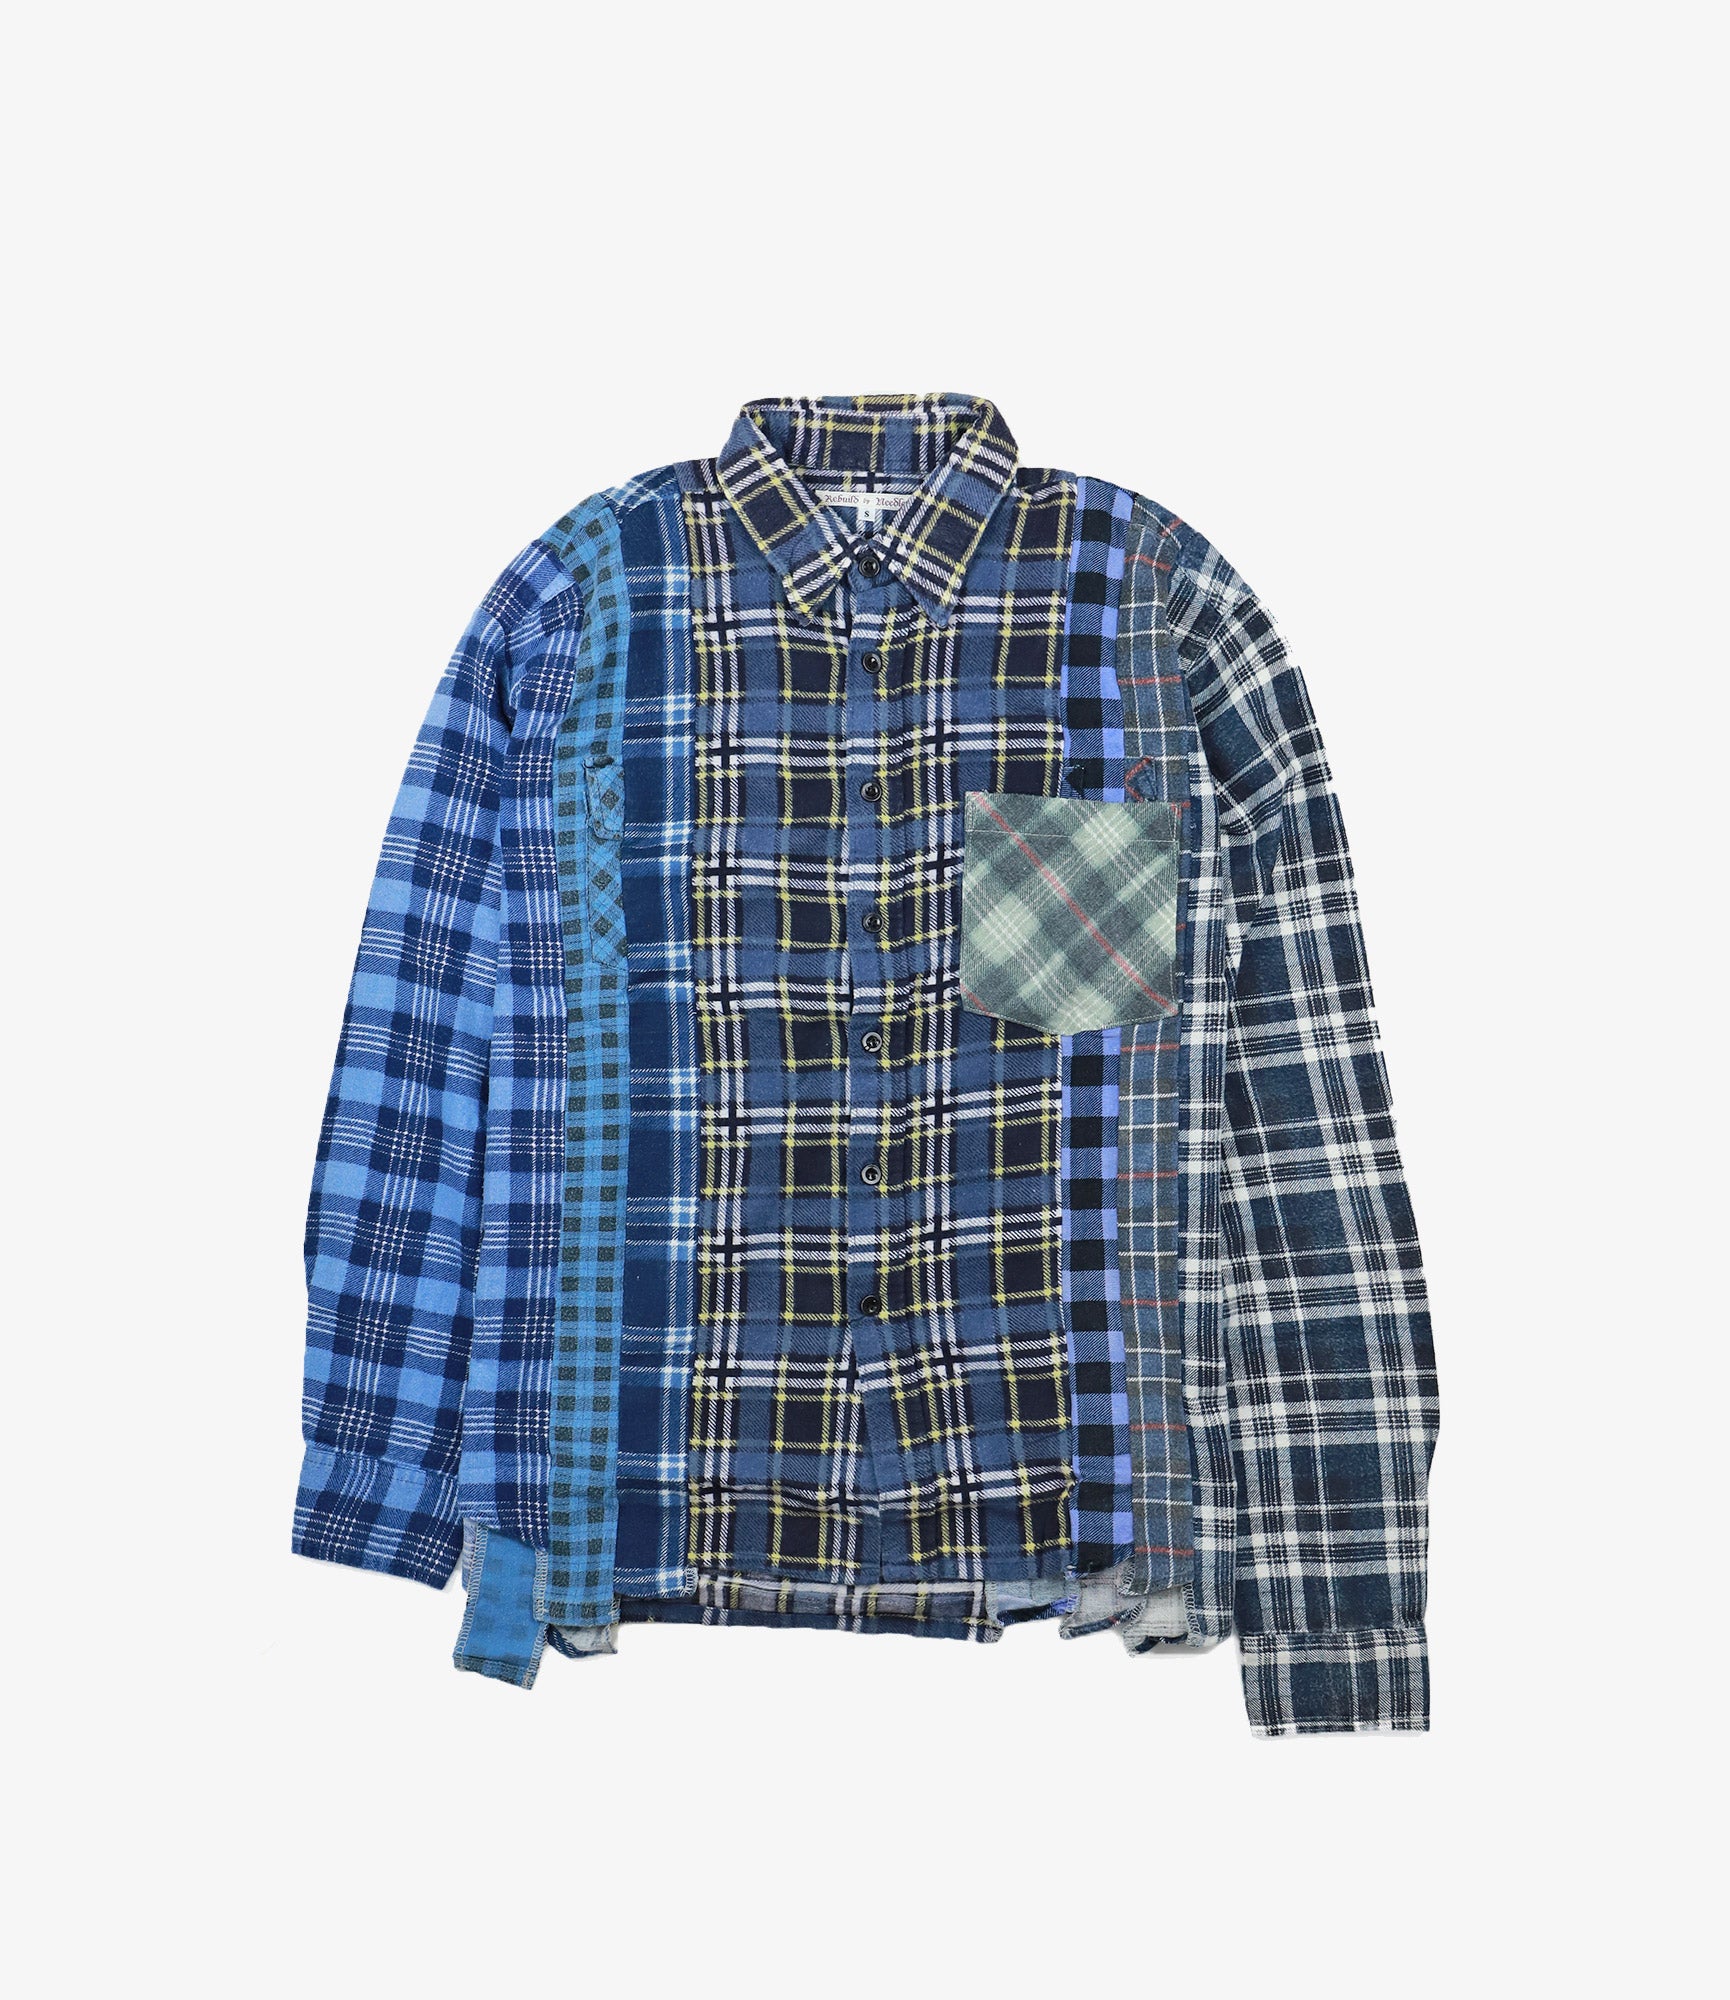 Rebuild by Needles Flannel Shirt - 7 Cuts Shirt | Nepenthes London